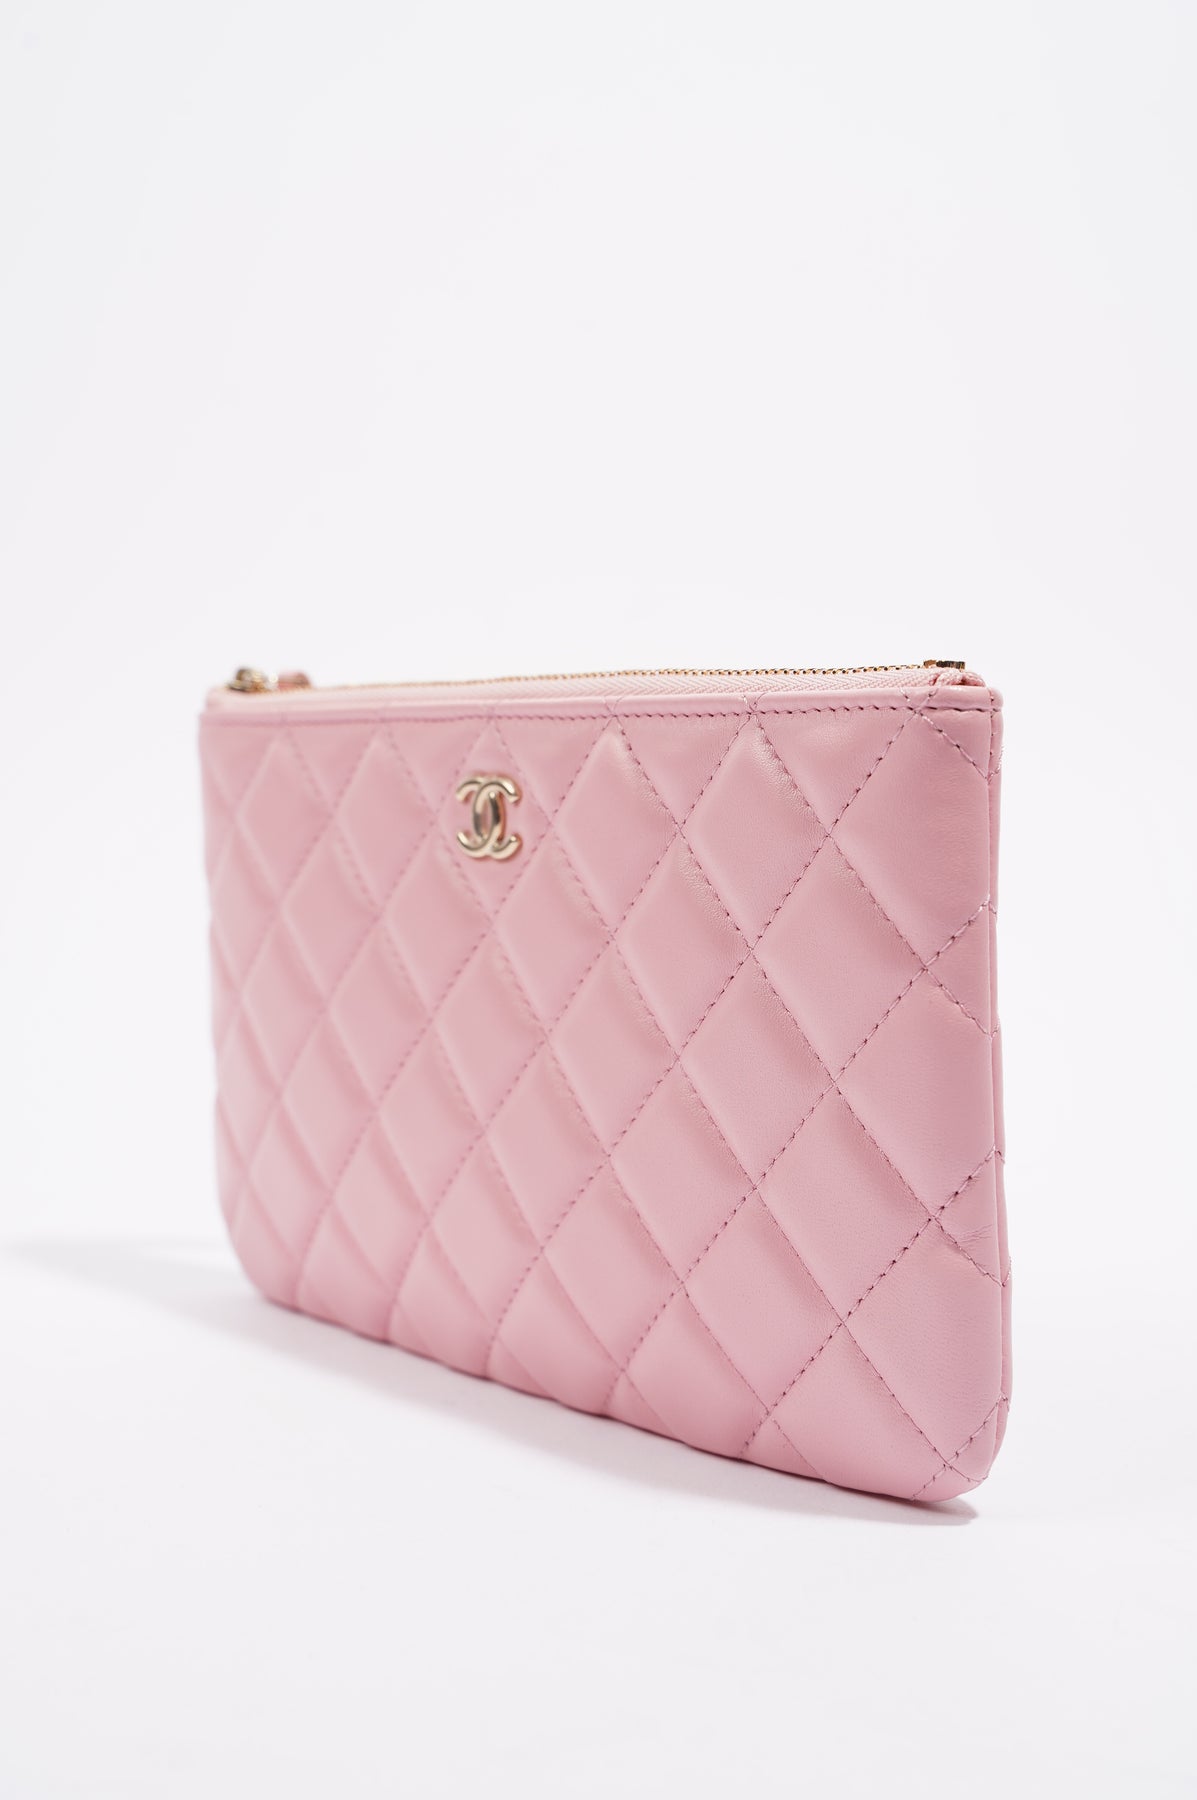 Chanel Quilted Lambskin Clutch Bag- O Case